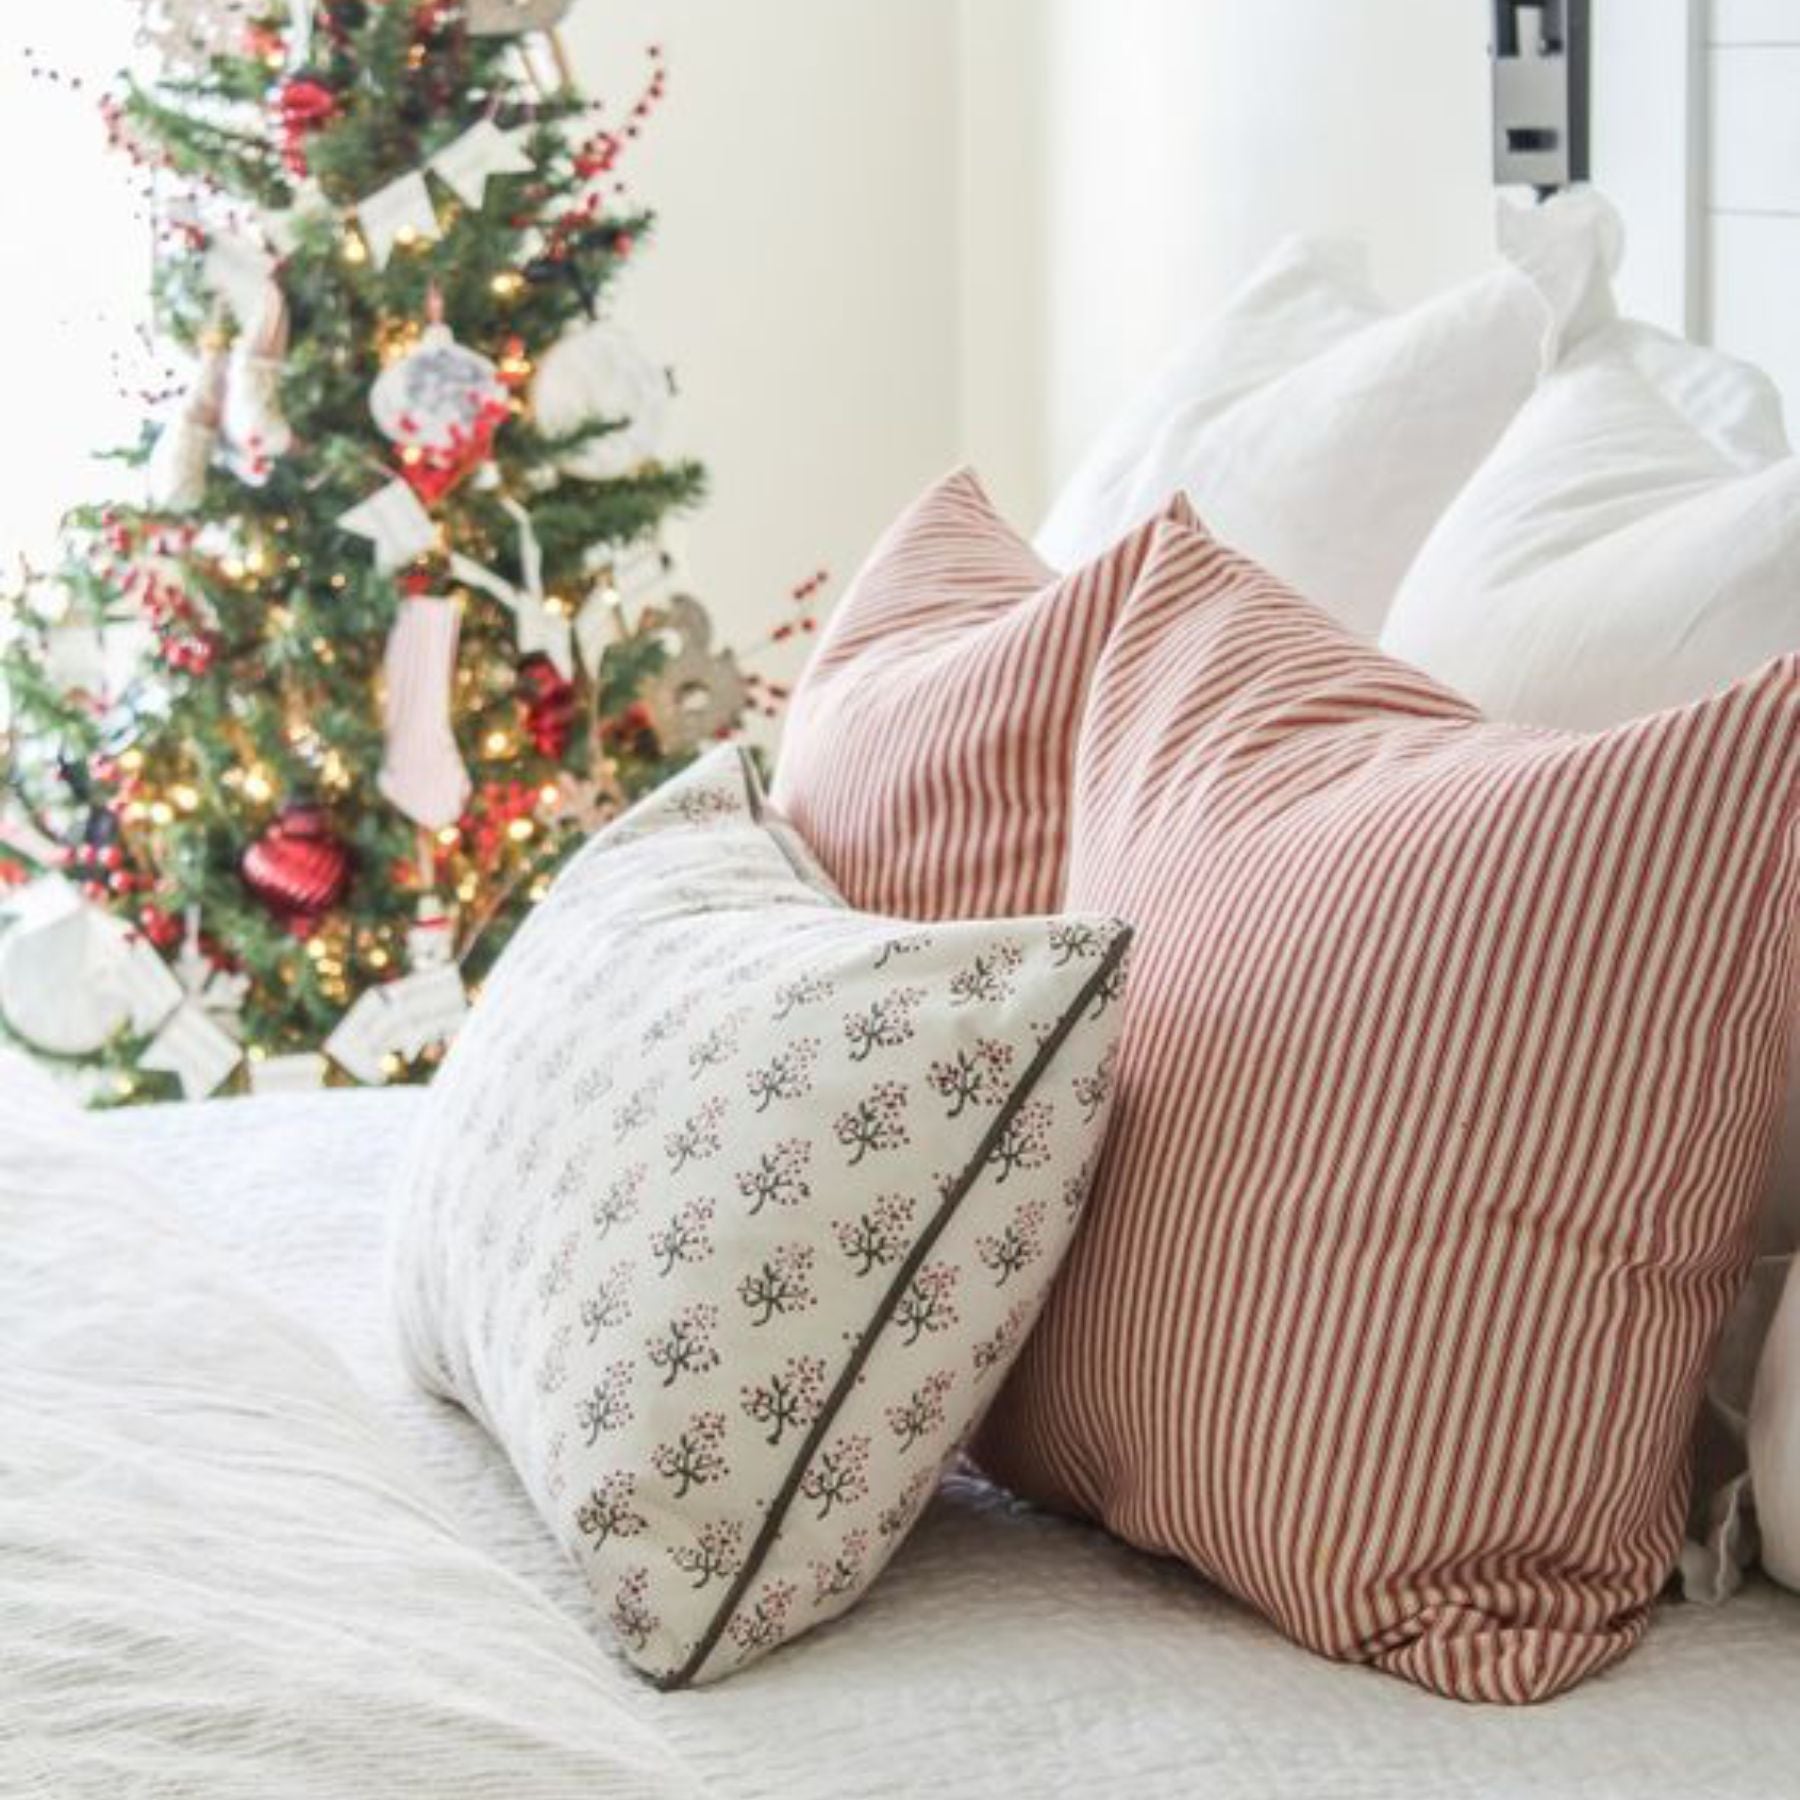 Changing your bedding is truly transformative, both in the short term and the long term ripple effect will spread throughout your living space.